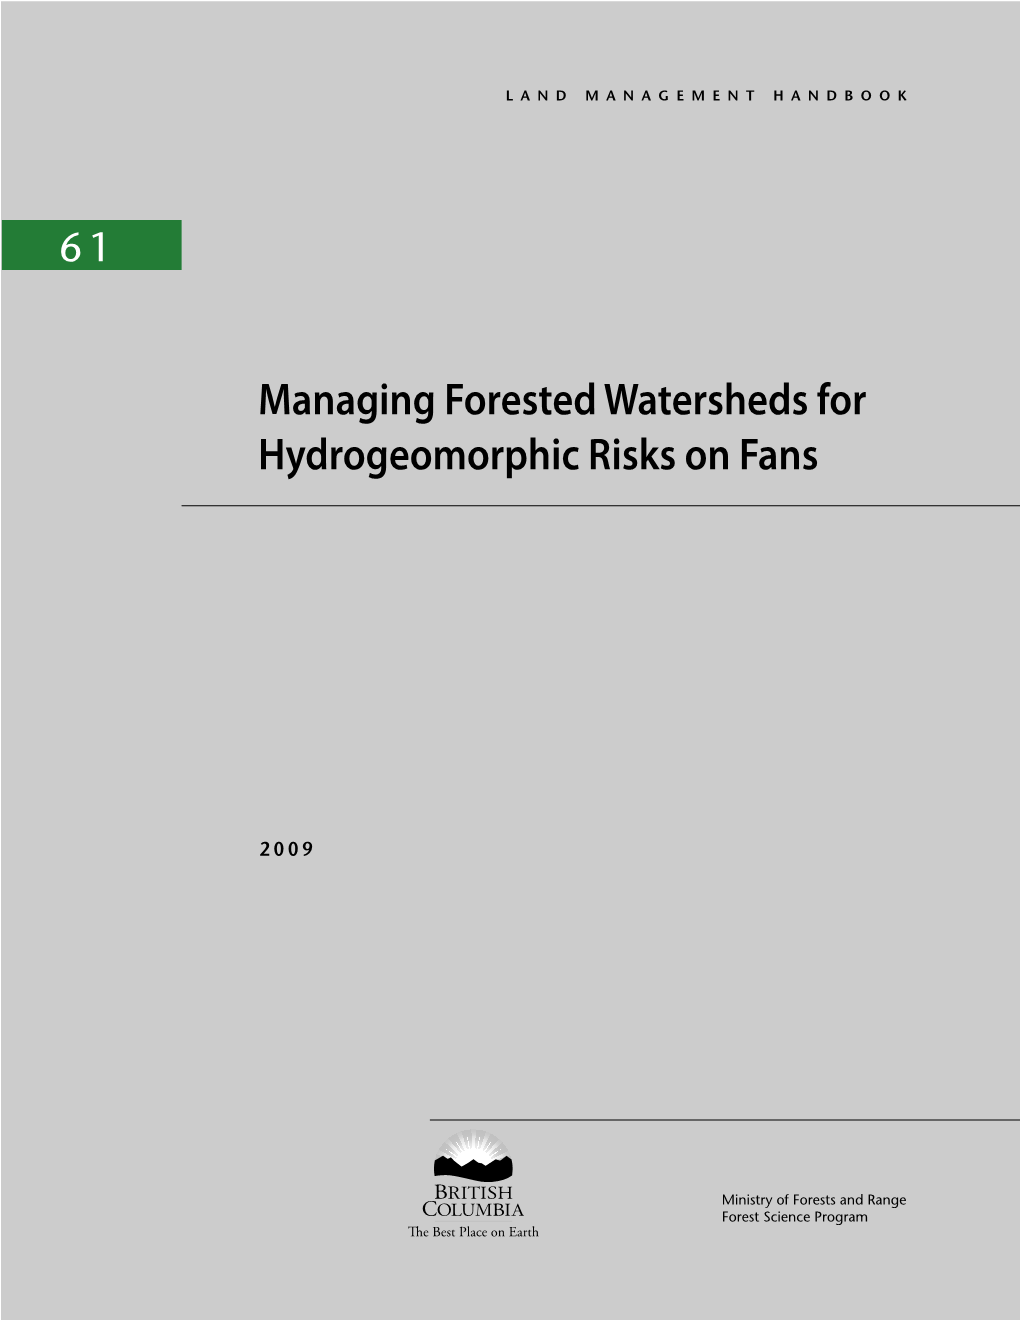 Managing Forested Watersheds for Hydrogeomorphic Risks on Fans